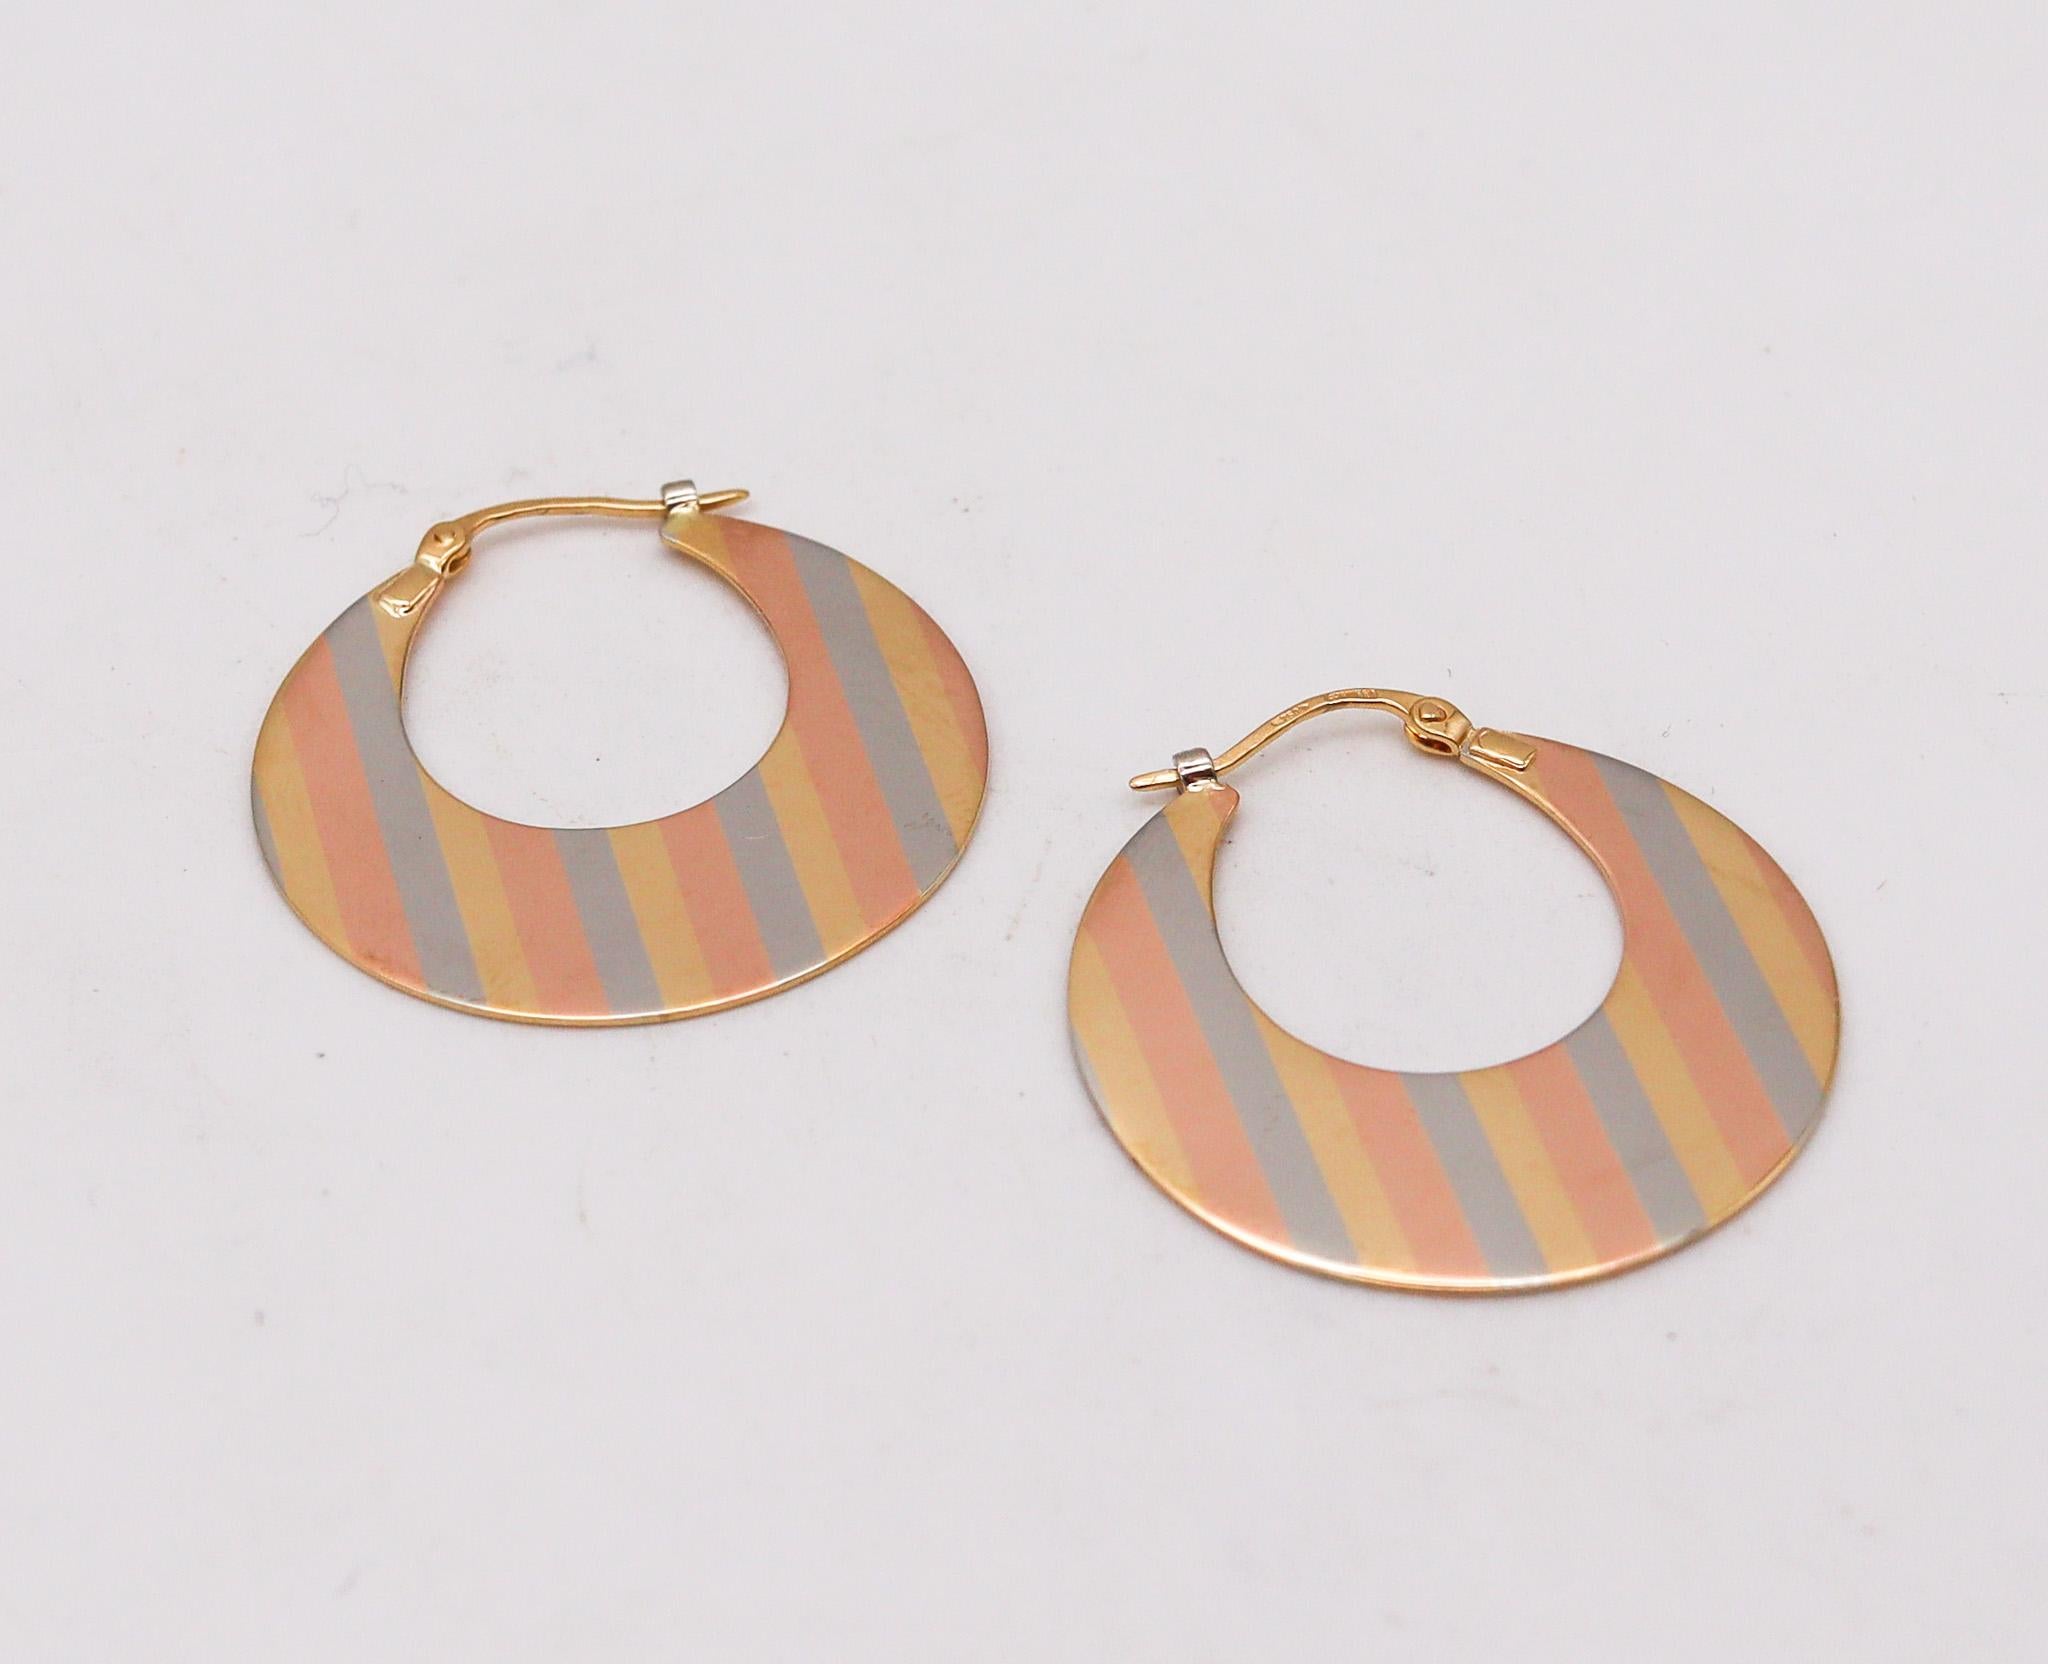 Hoops earrings designed by Uno A Erre.

A sculptural pair of hoop earrings, created in the city of Arezzo Italy by the famous jewelry makers of Uno A Erre, back in the 1970. They are crafted in a circular shape with geometric patterns in the